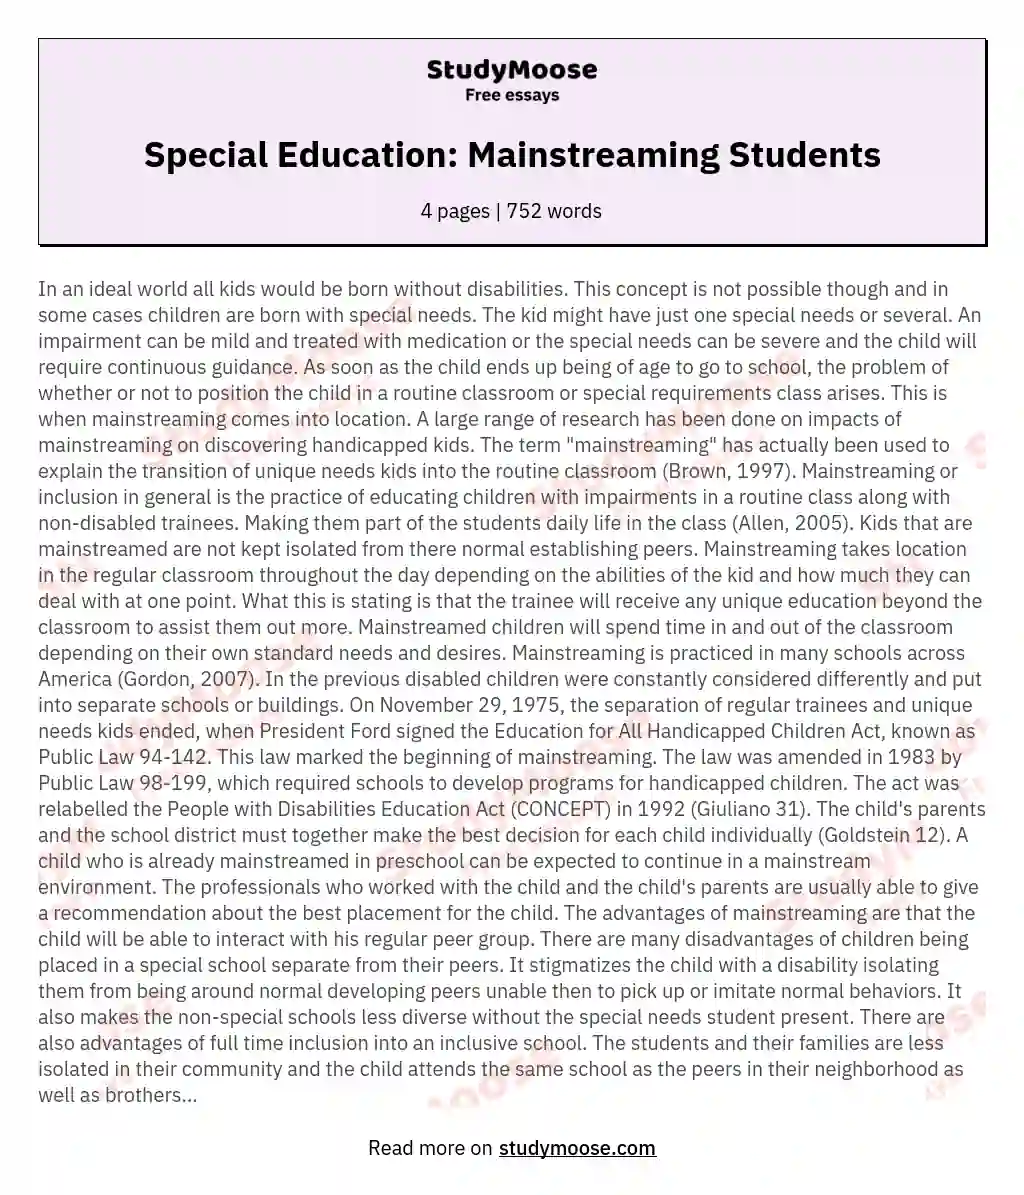 Special Education: Mainstreaming Students essay